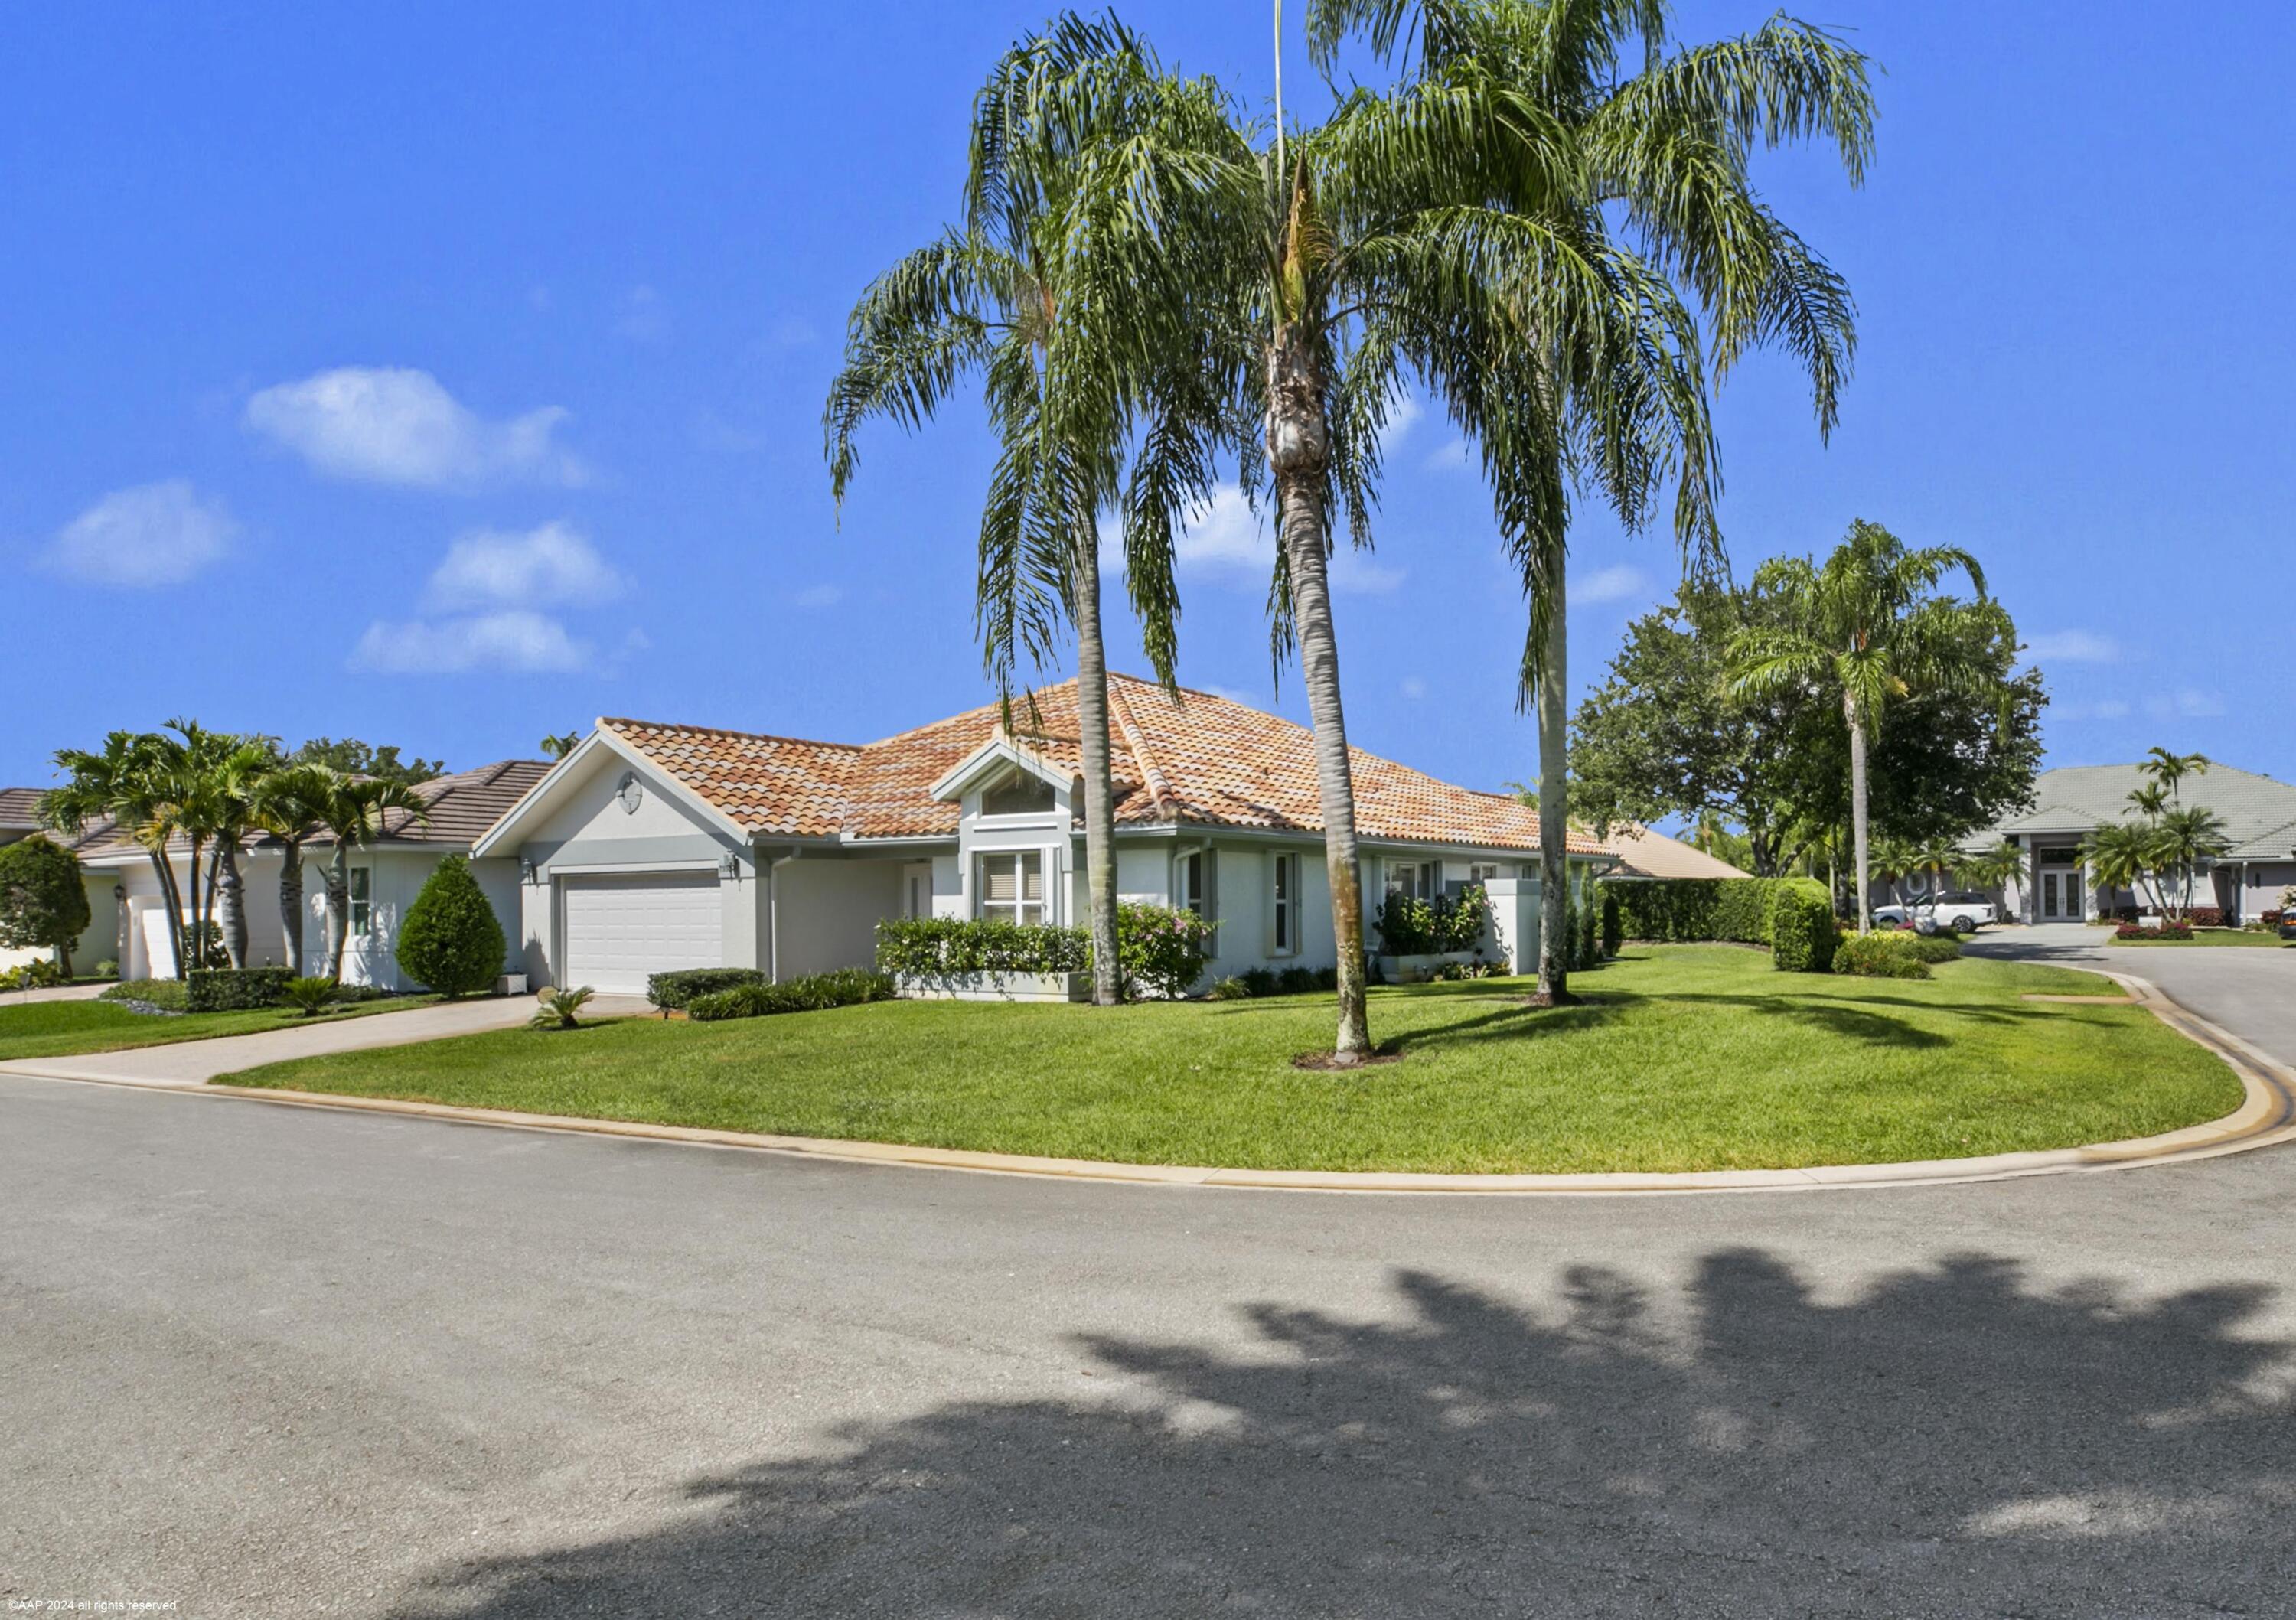 a front view of a house with a yard and palm trees